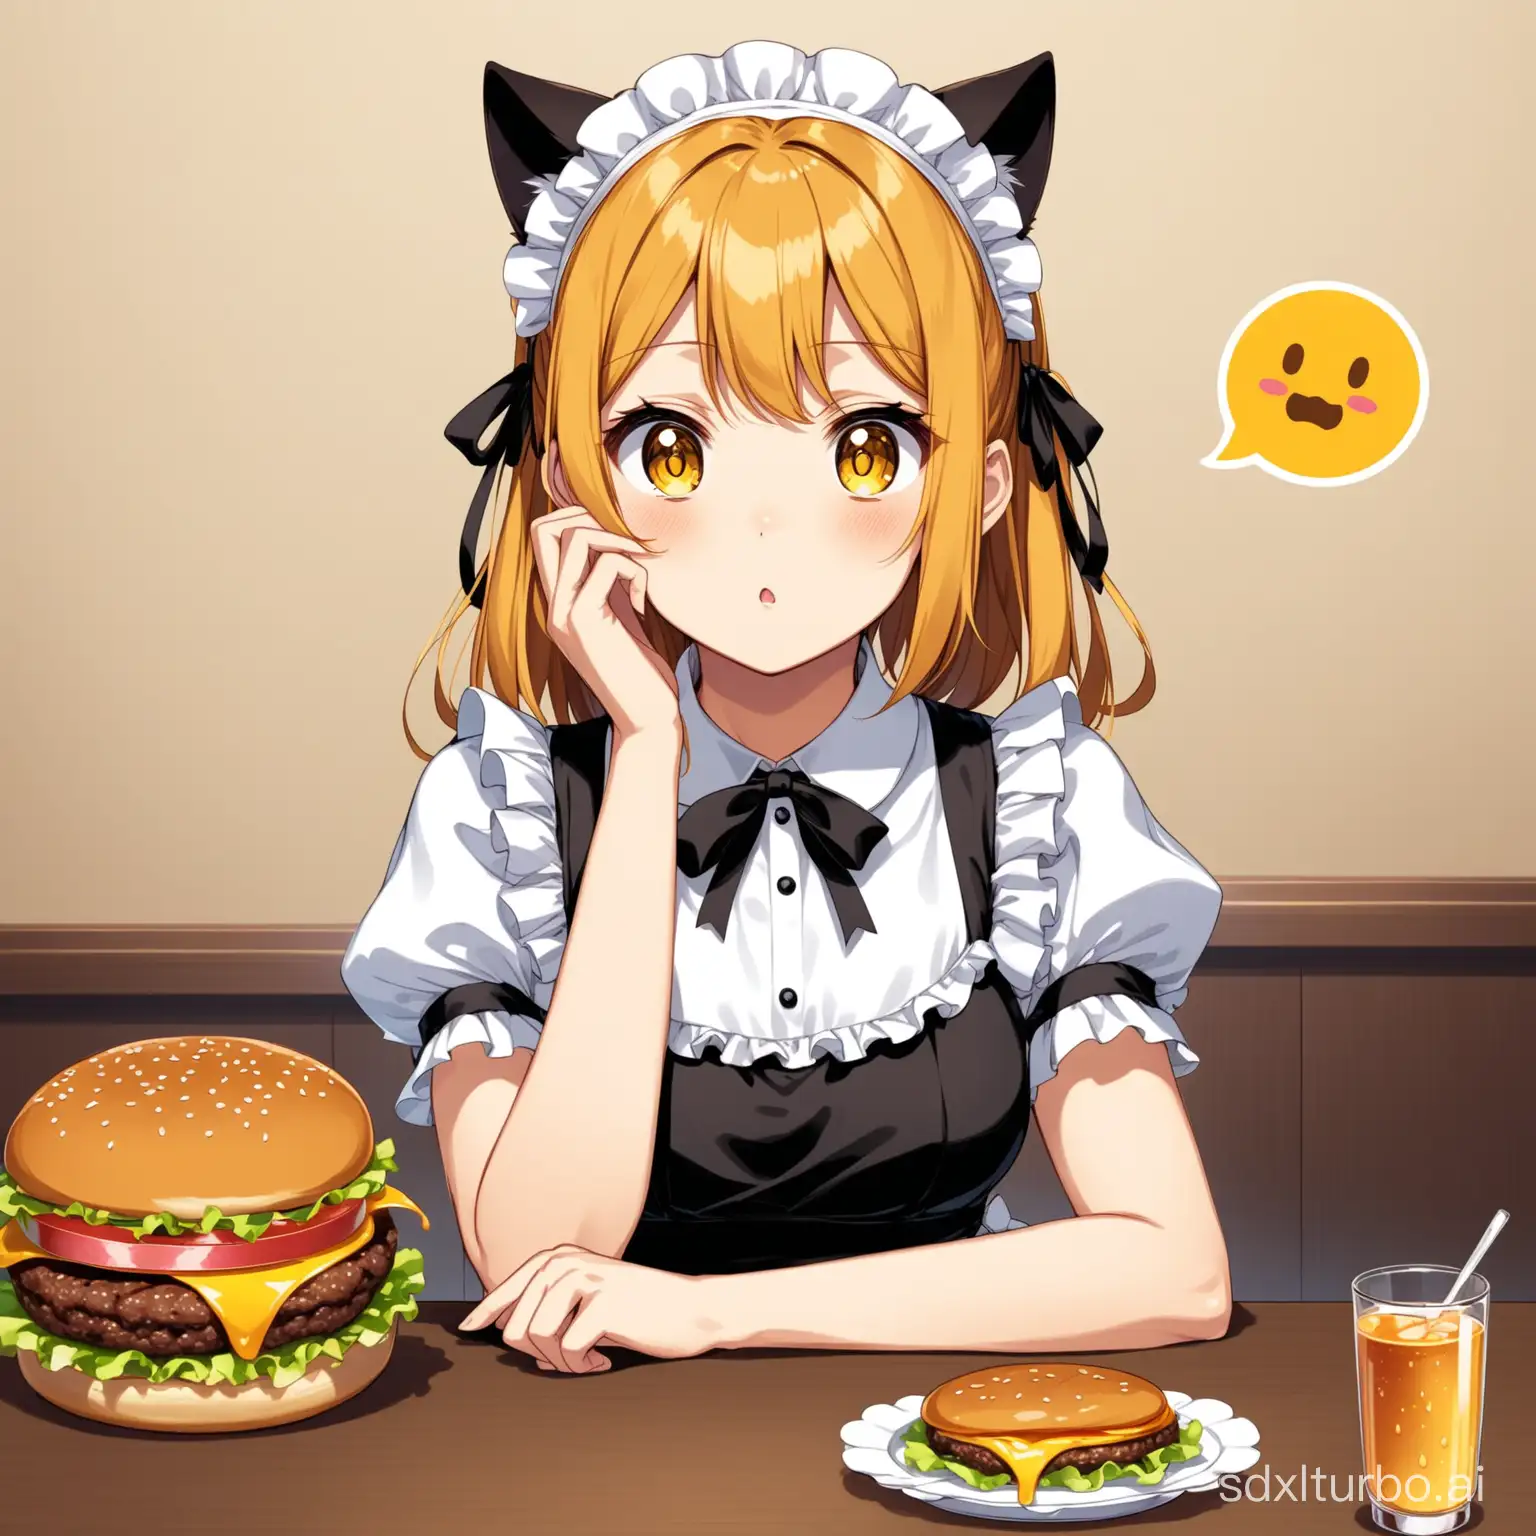 a confused anime girl with cat ears wearing a maid dress with a thinking emoji over her head, looking at a burger on a table